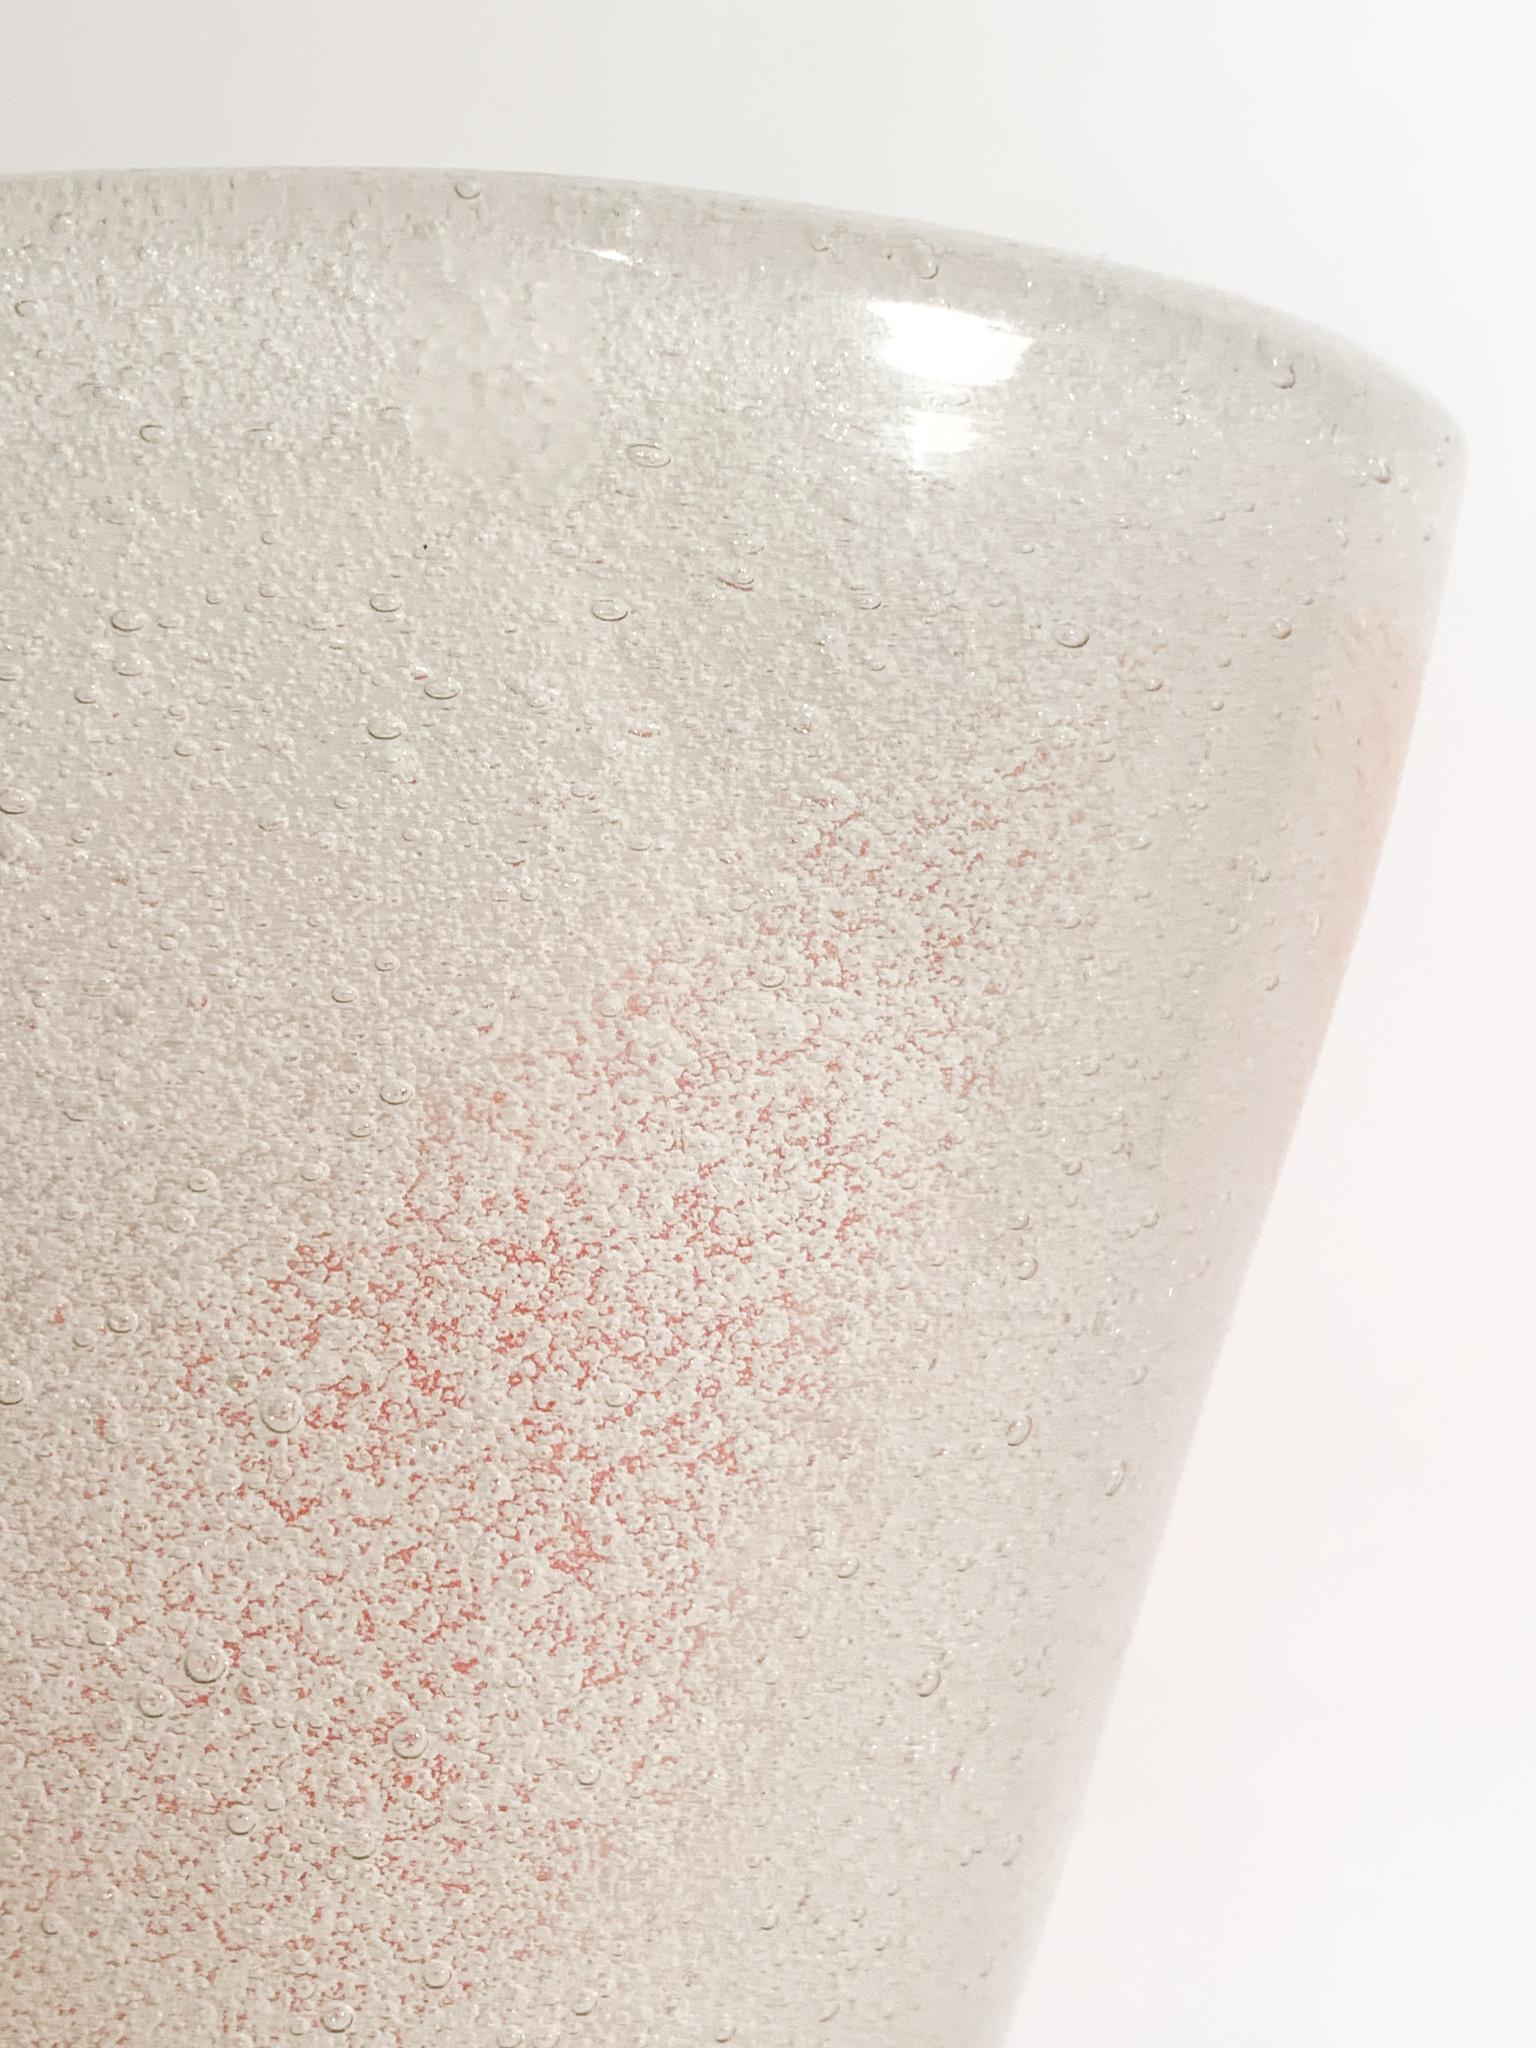 Italian Sommerso White and Orange Murano Glass Vase from the 1980s For Sale 5